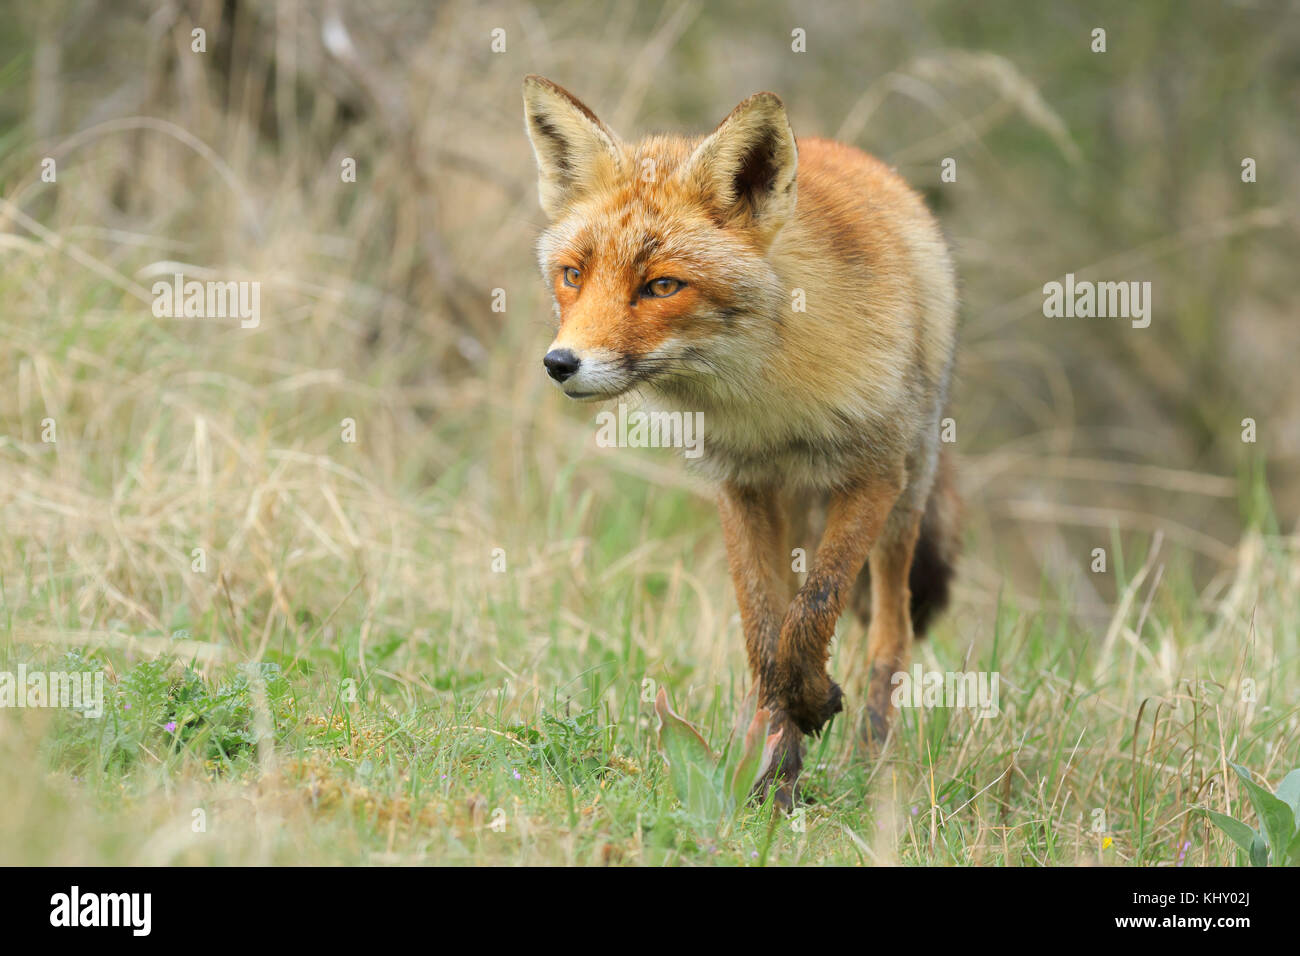 Front view of a wild red fox (vulpes vulpes) walking in a forest during Autumn season. Stock Photo